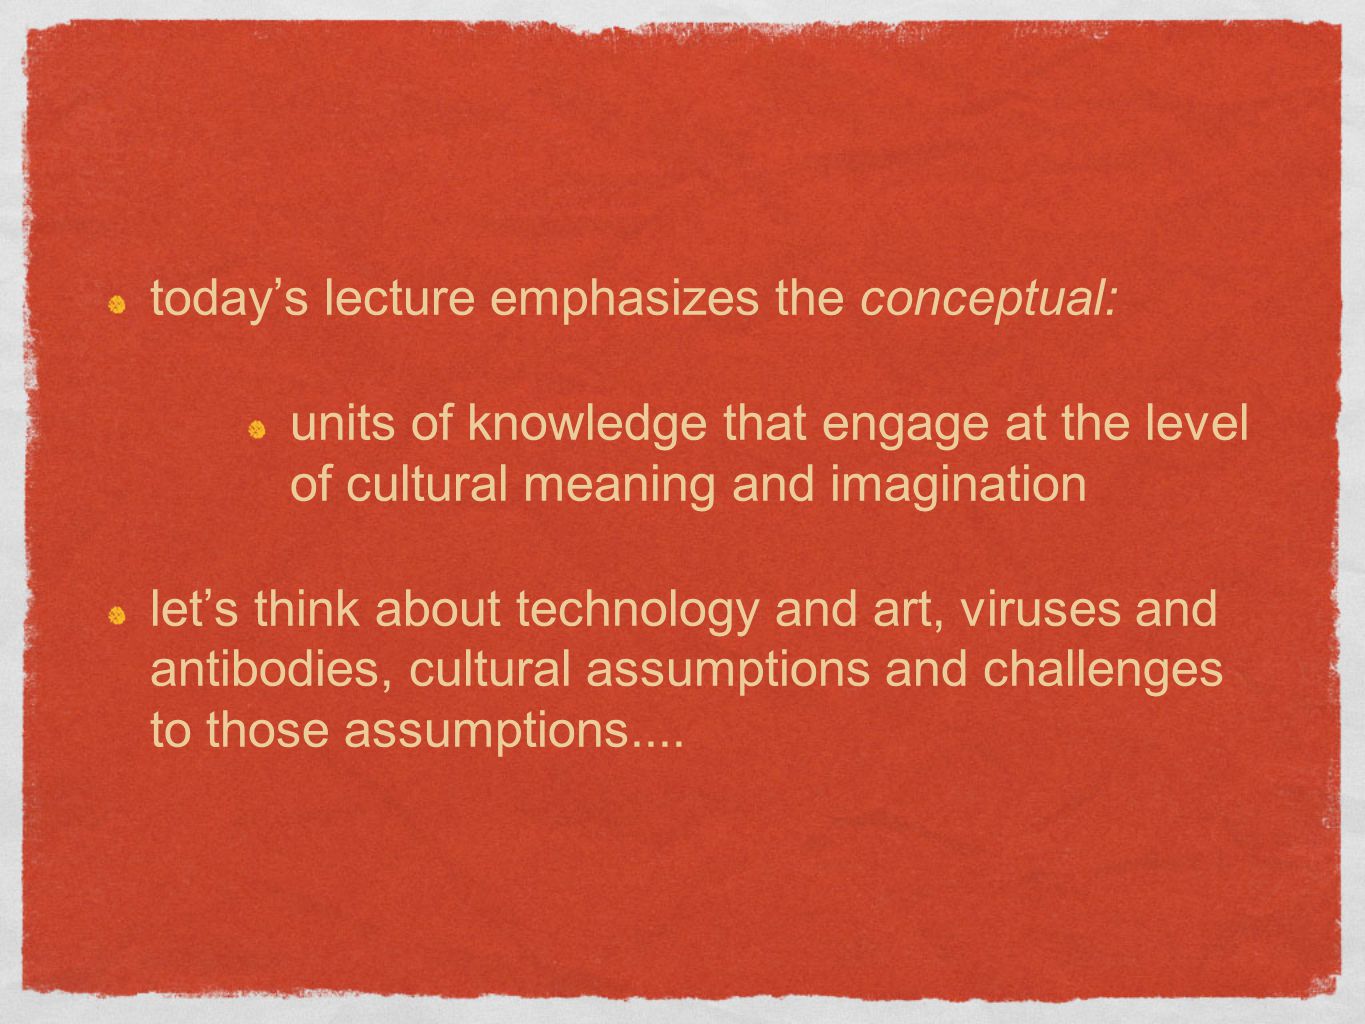 today’s lecture emphasizes the conceptual: units of knowledge that engage at the level of cultural meaning and imagination let’s think about technology and art, viruses and antibodies, cultural assumptions and challenges to those assumptions....